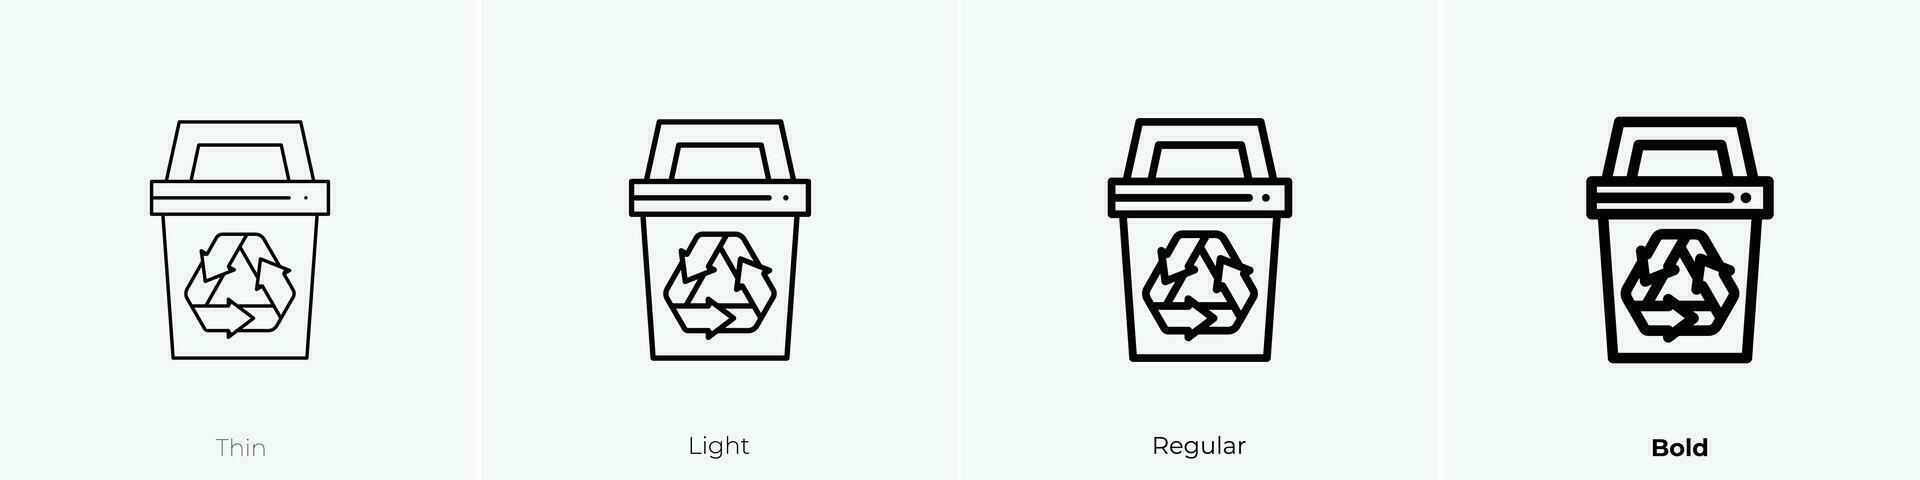 recycle bin icon. Thin, Light, Regular And Bold style design isolated on white background vector